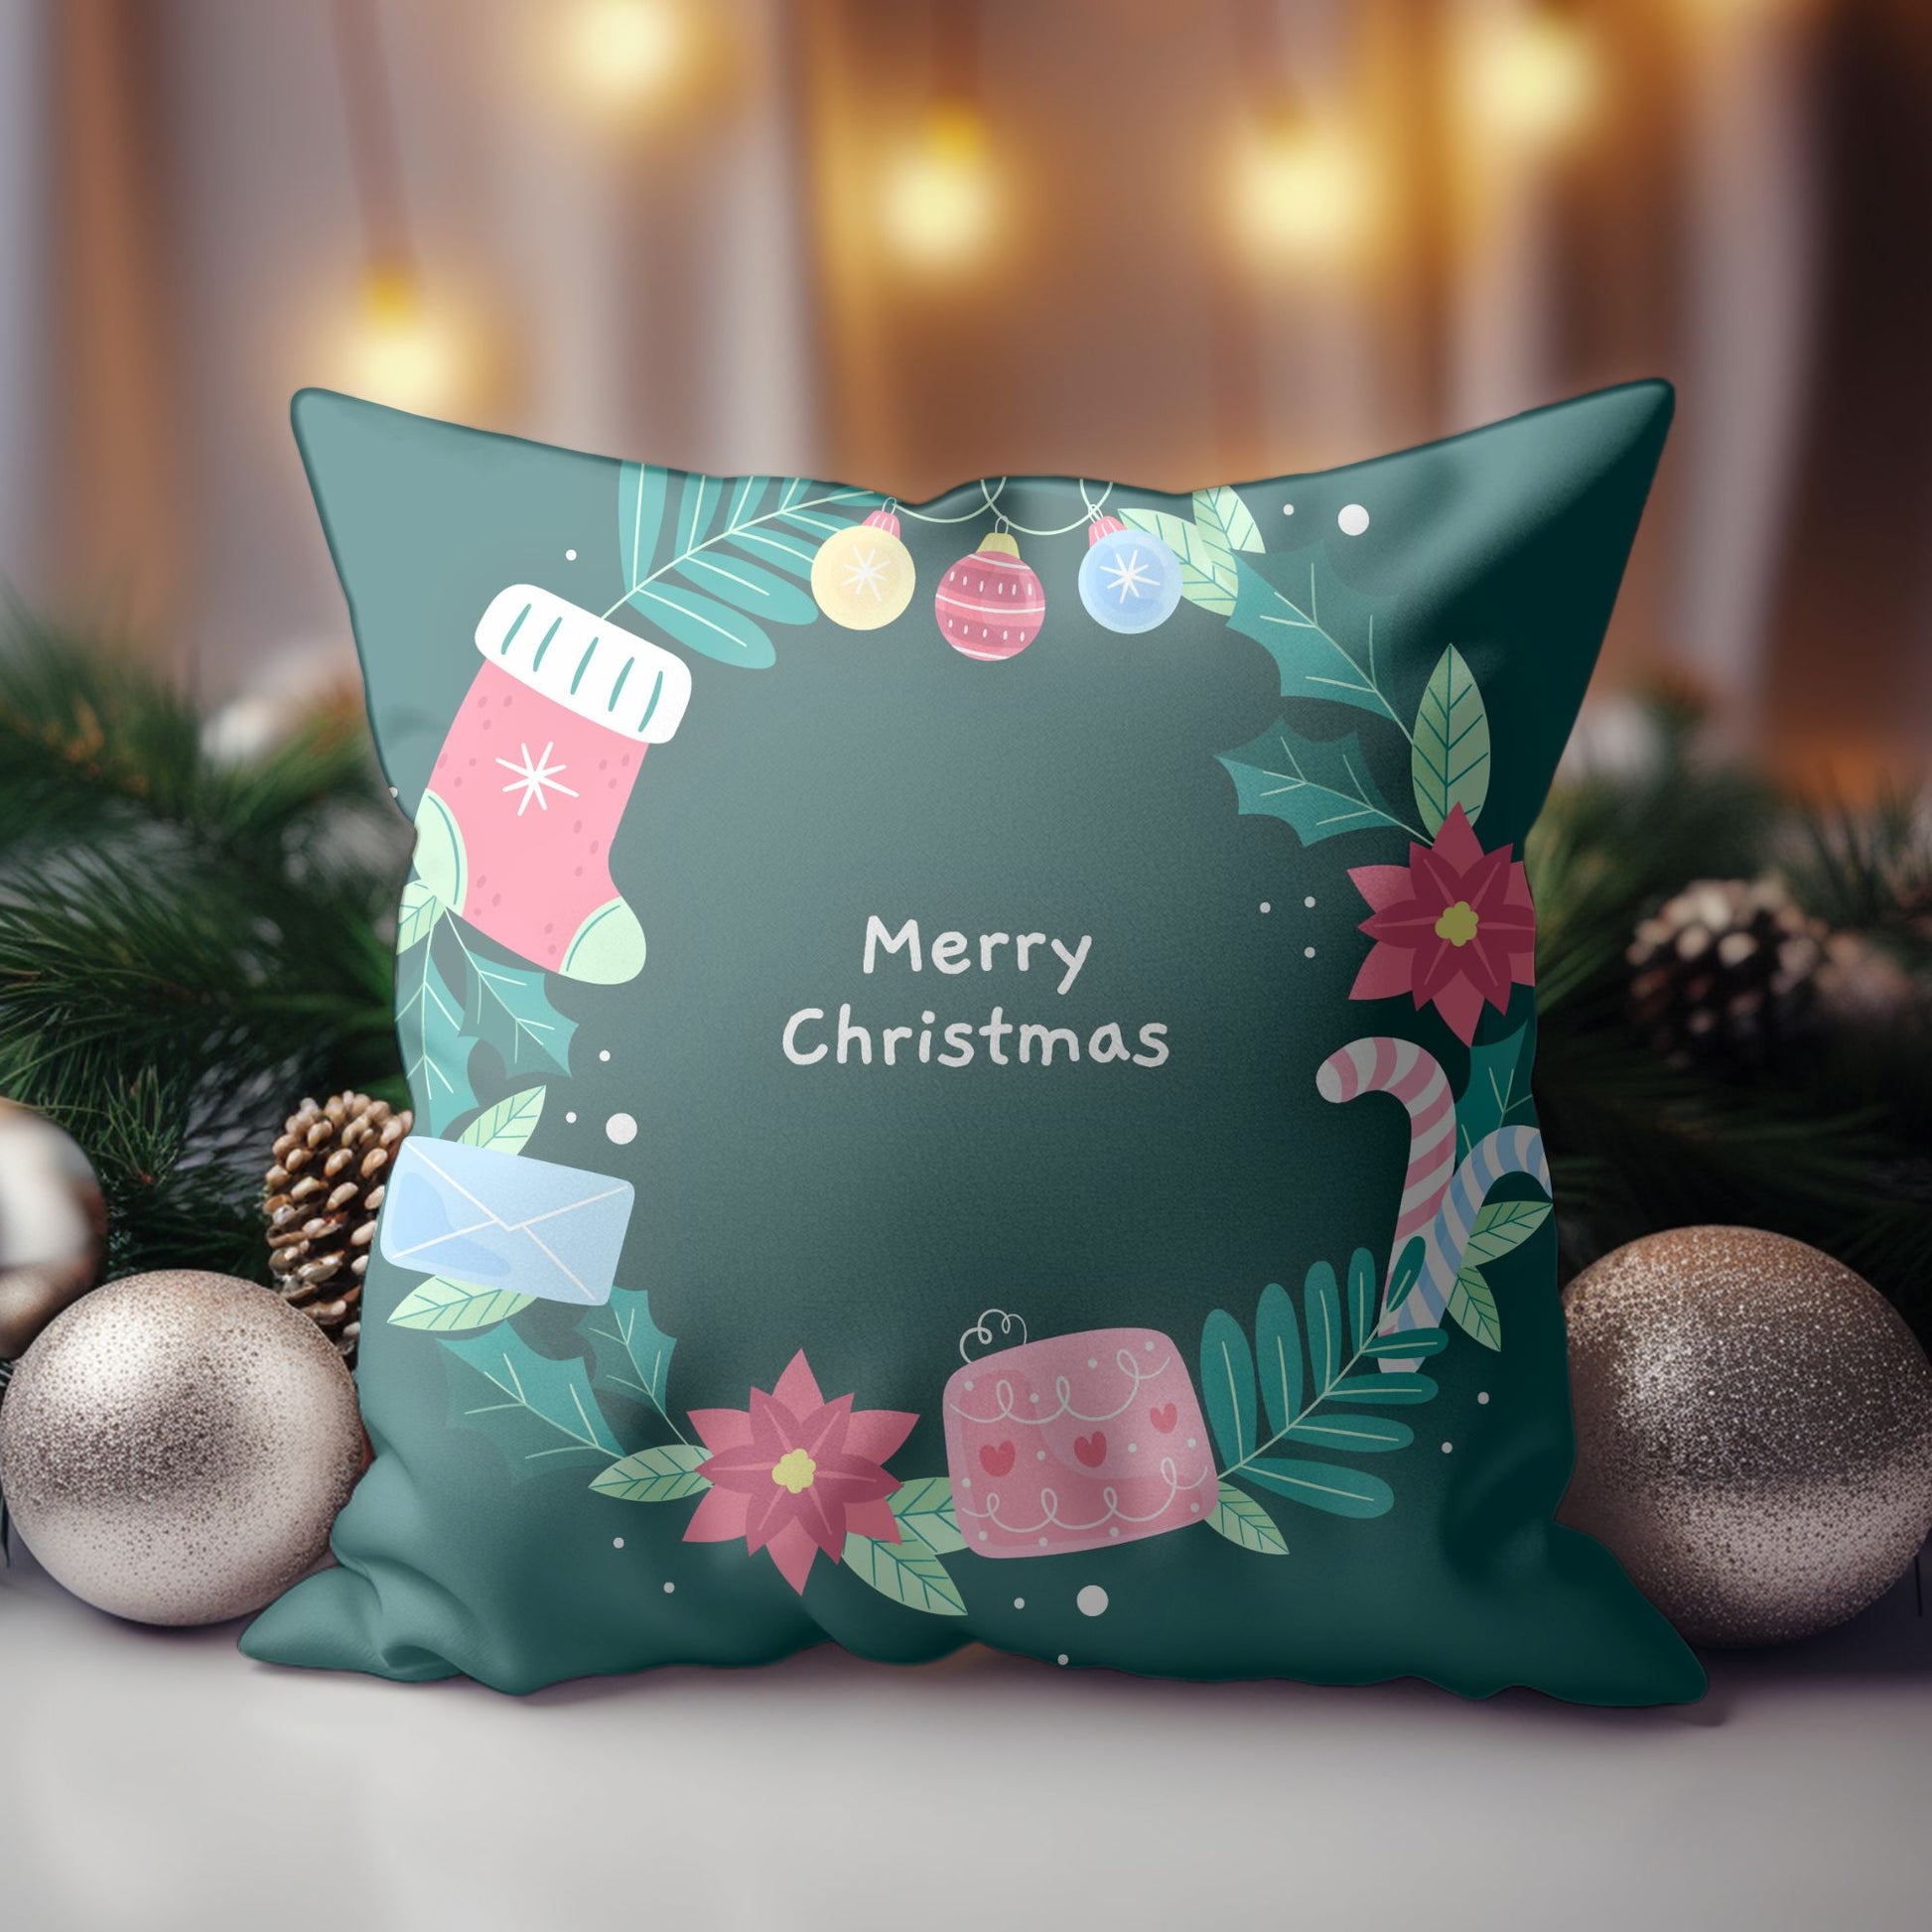 Decorative holiday pillow with a welcoming message